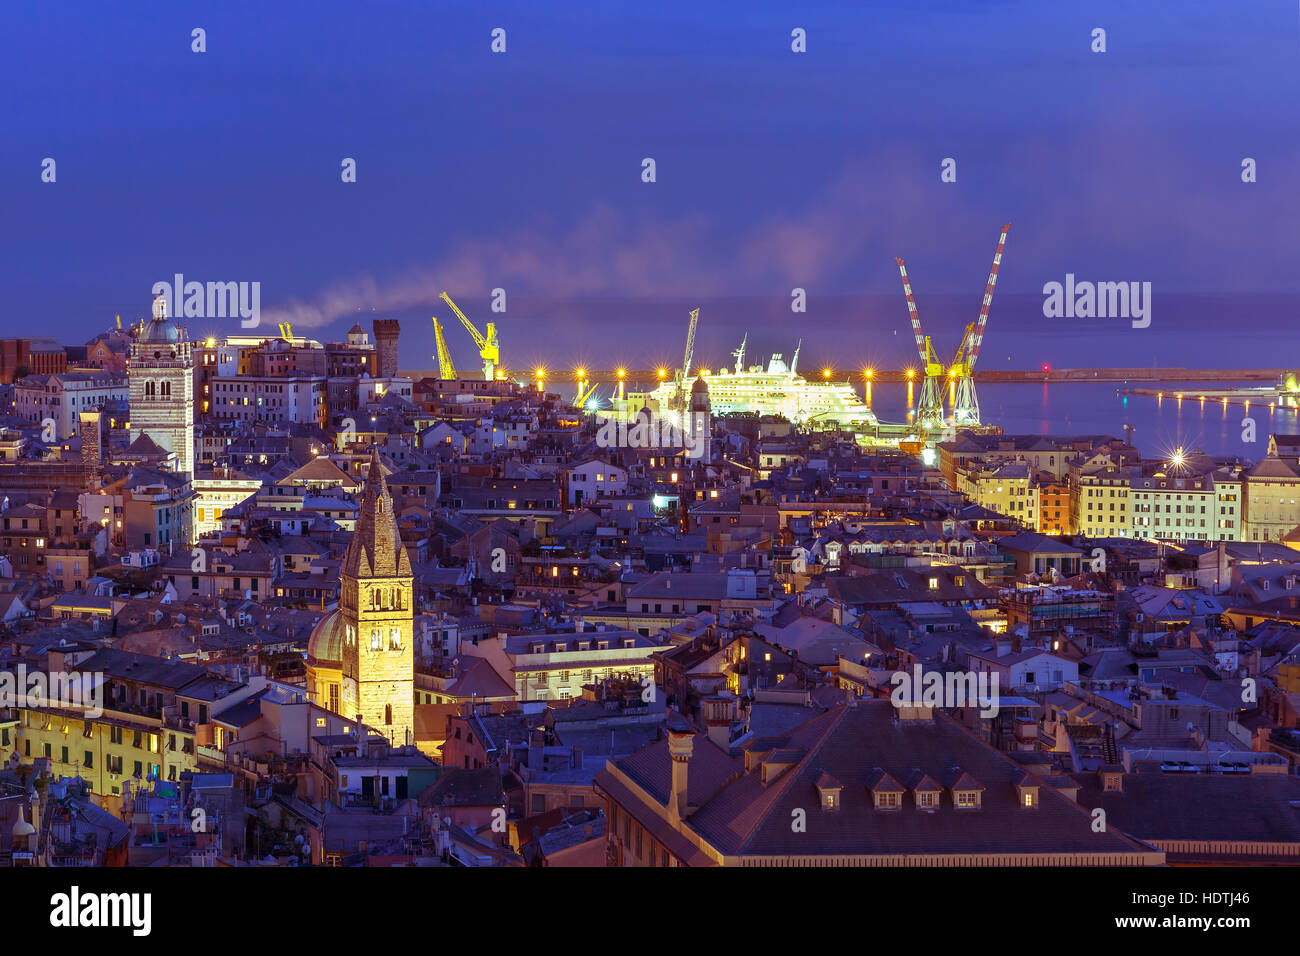 Old town and port of Genoa at night, Italy. Stock Photo